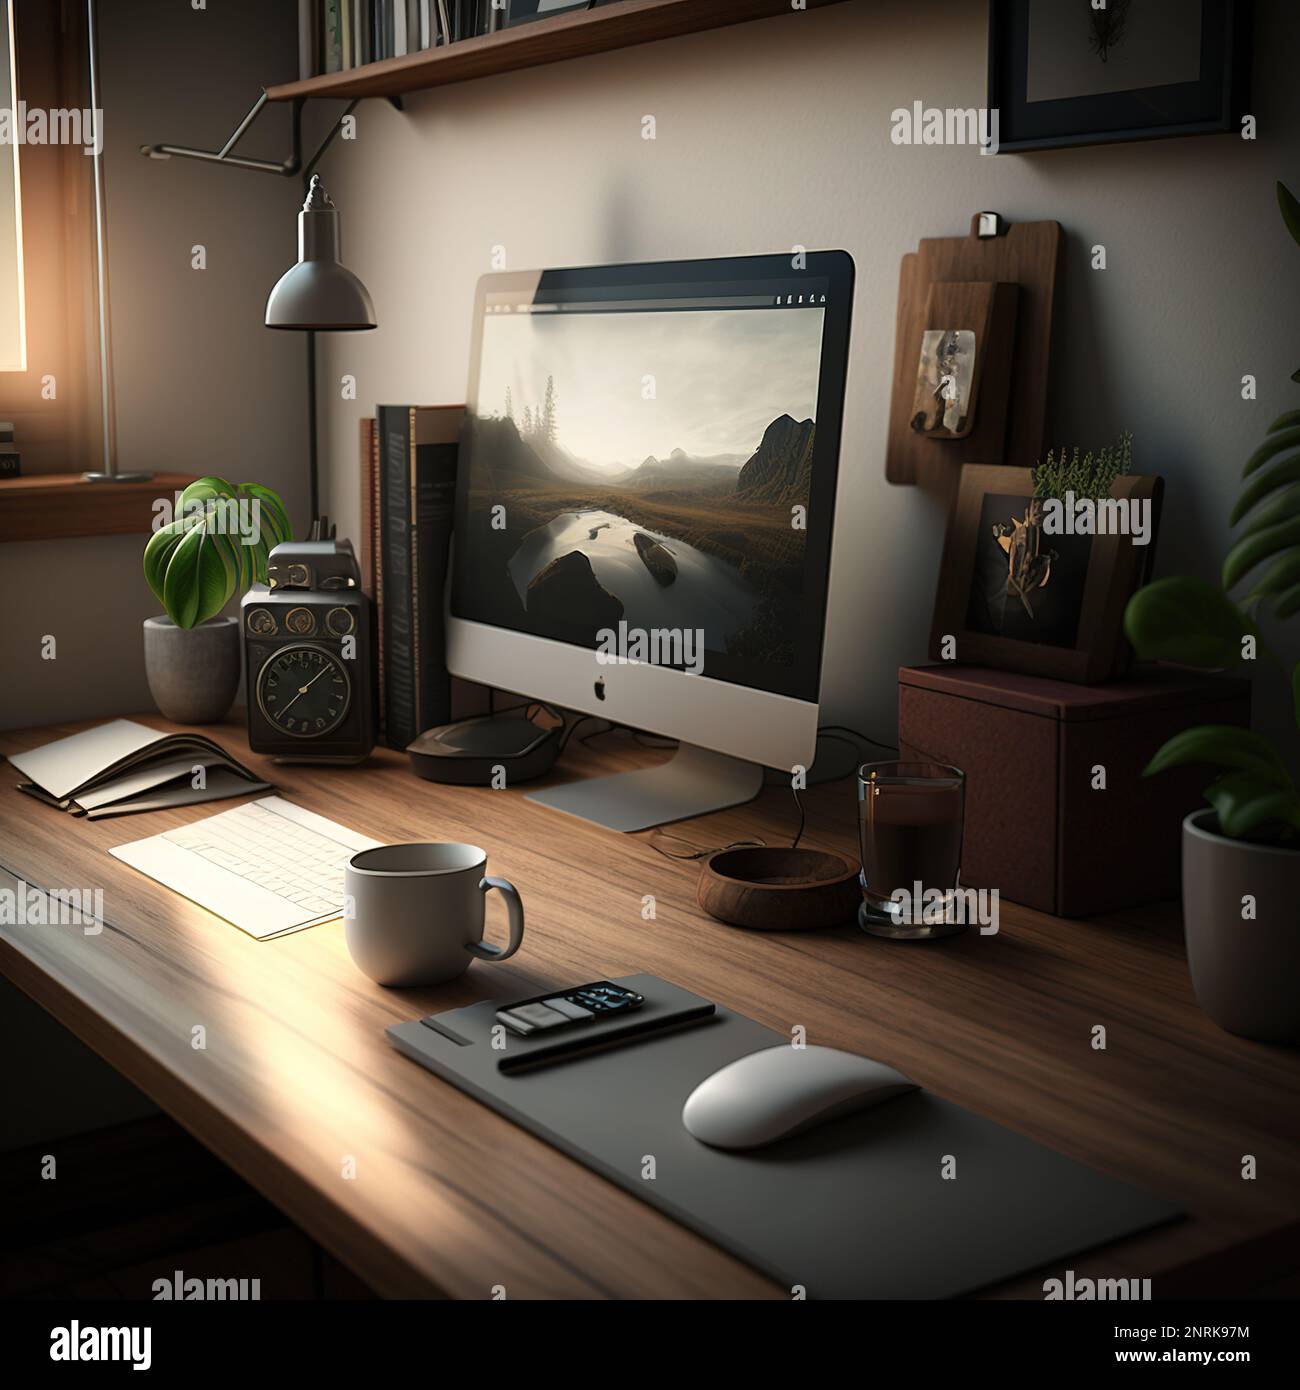 Ergonomic Oasis A Modern Workspace Abloom with Technology Stock Photo